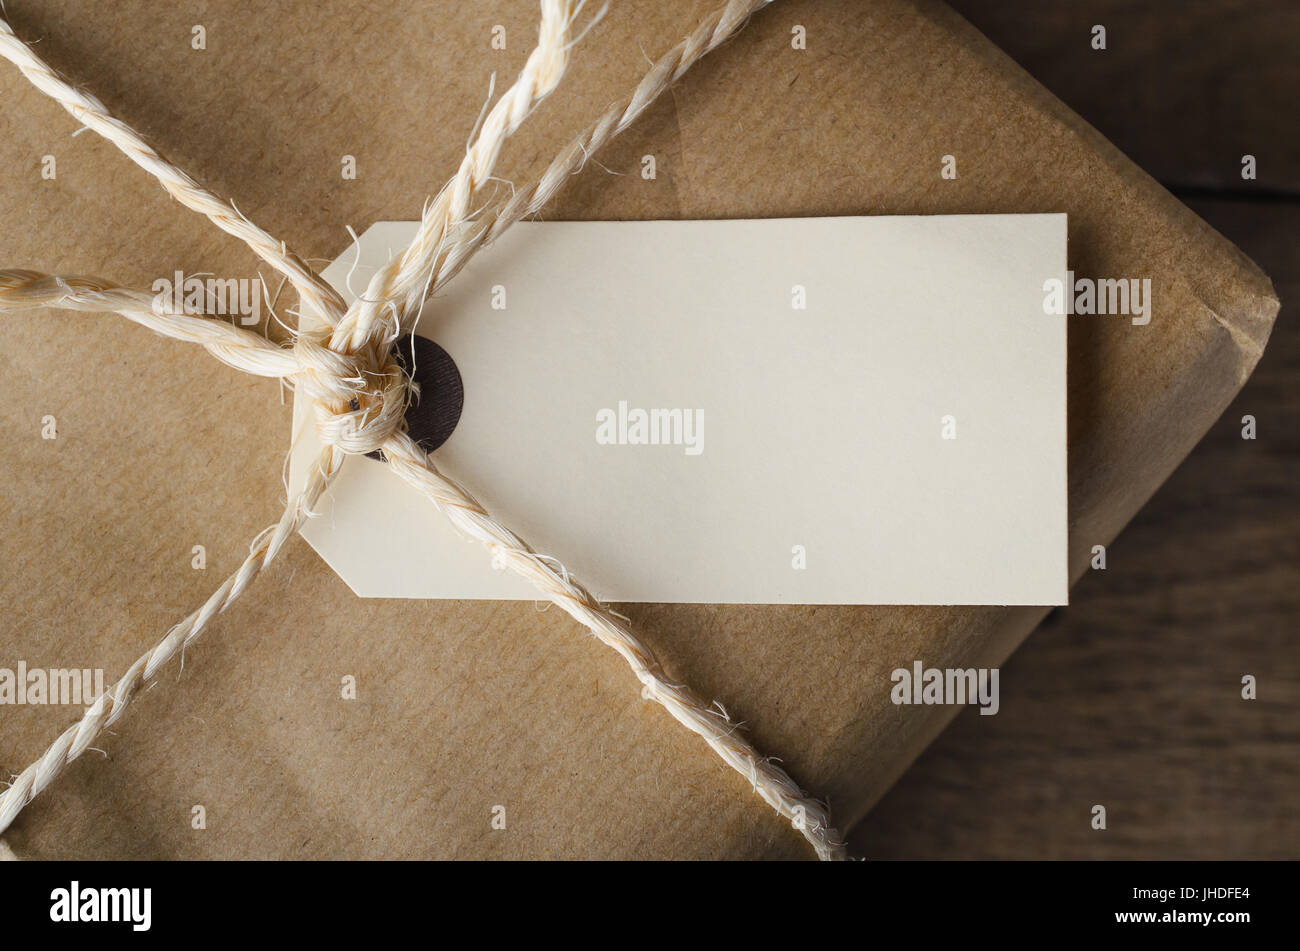 Box Plain Brown Wrapping Paper Tied Stock Photo 8160364